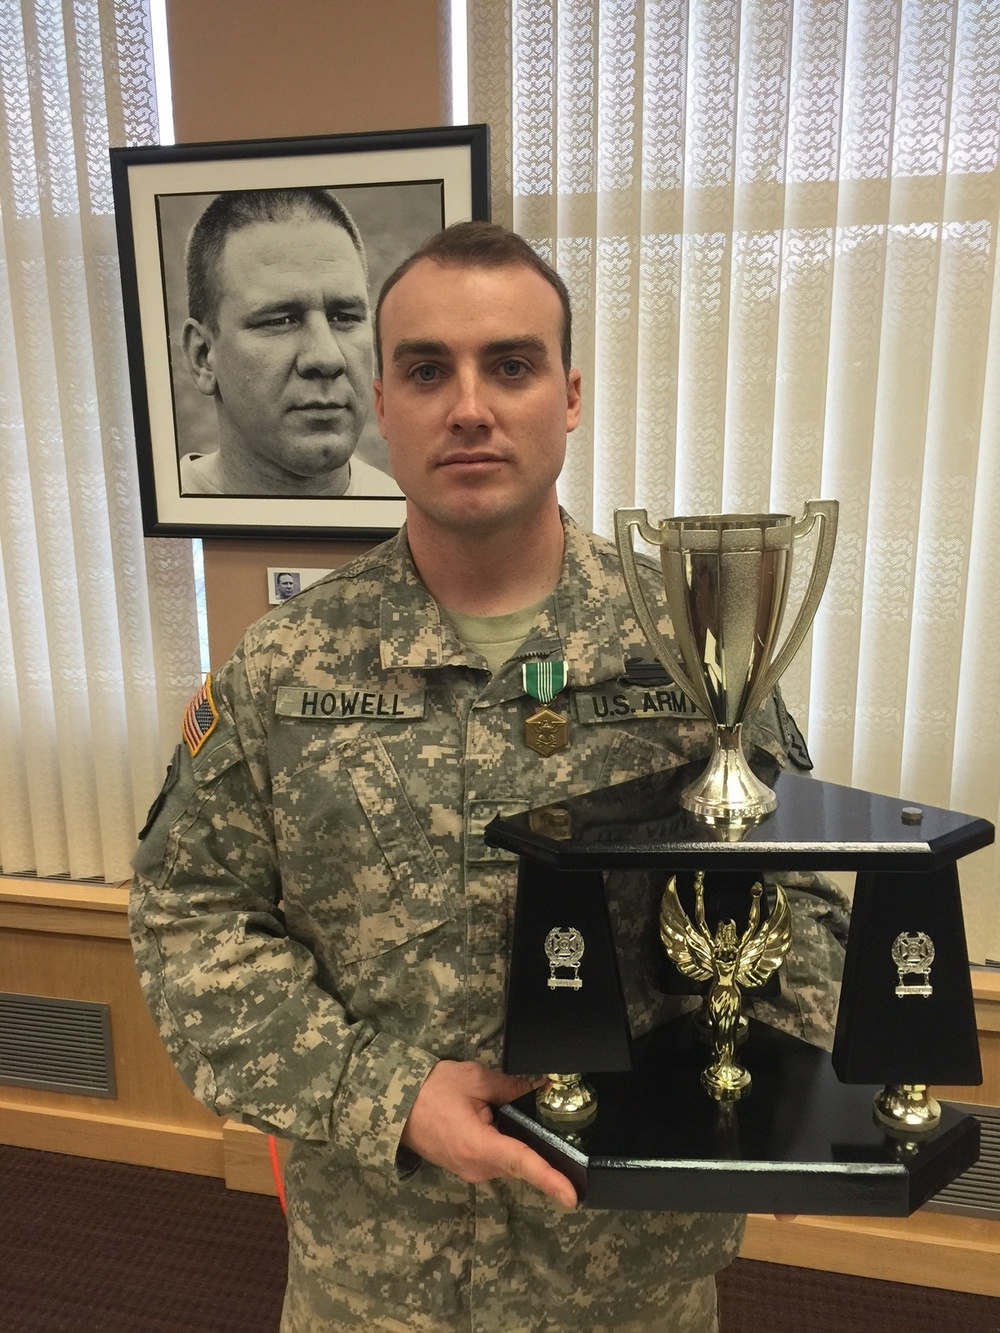 Staff Sgt. Jean-Noel Howell receives an award for top performer